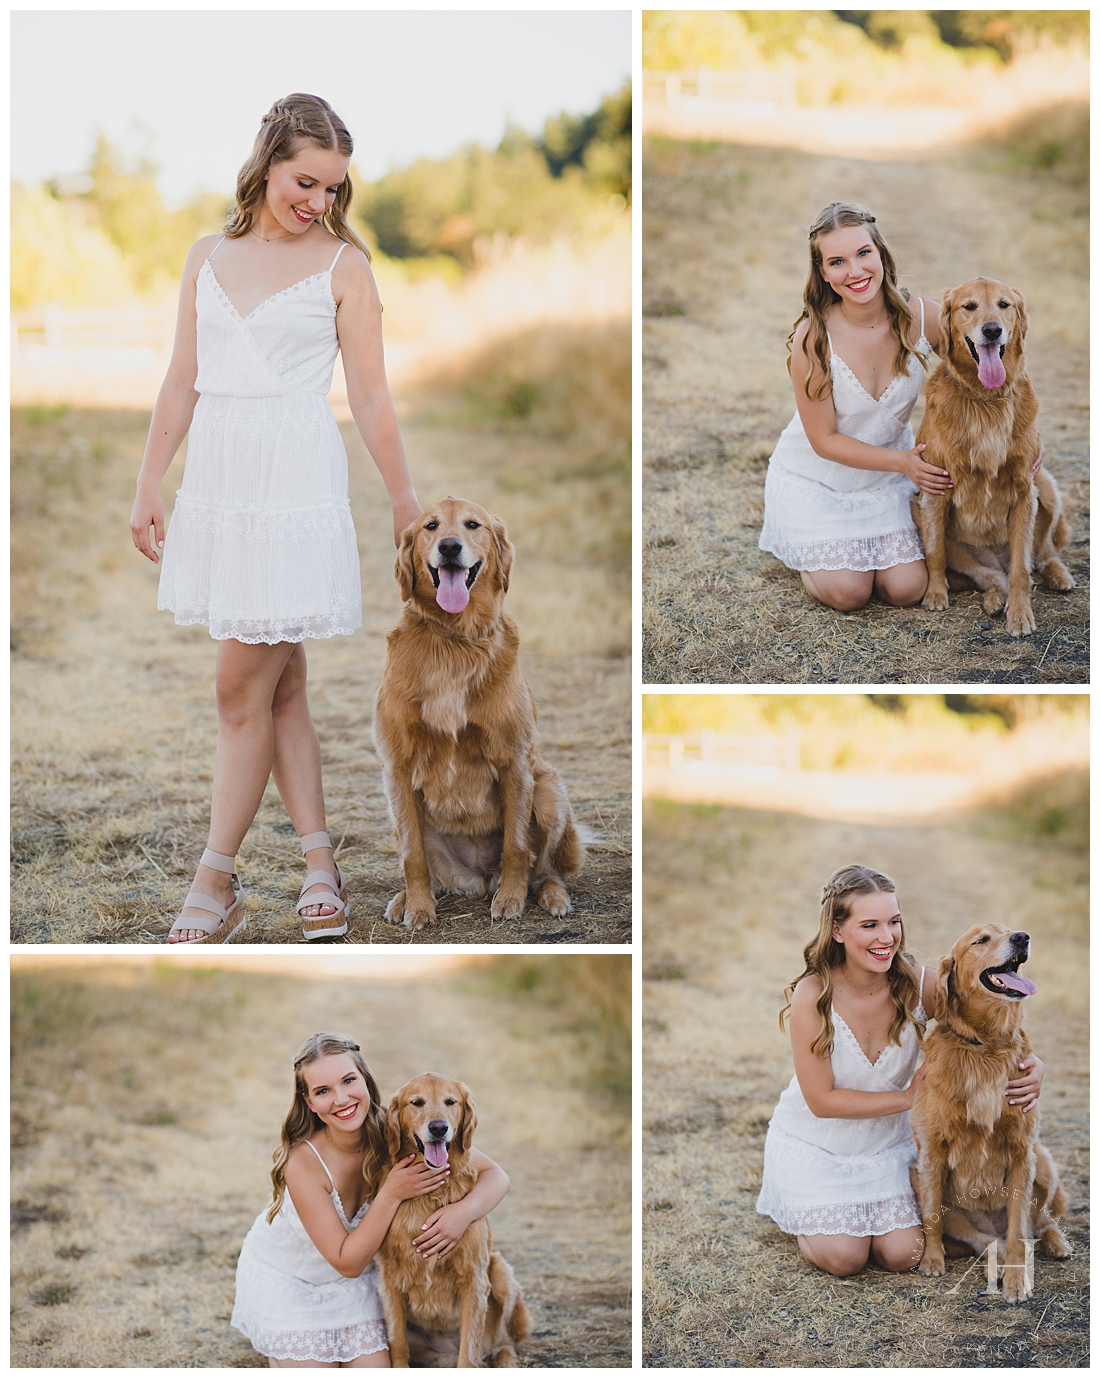 Cute Senior Girl with her Dog | How to Pose with Pets, Senior Portraits with Dogs, Senior Portraits with Family Pets, Who to Bring to Your Senior Portrait Session | Photographed by the Best Tacoma Senior Portrait Photographer Amanda Howse